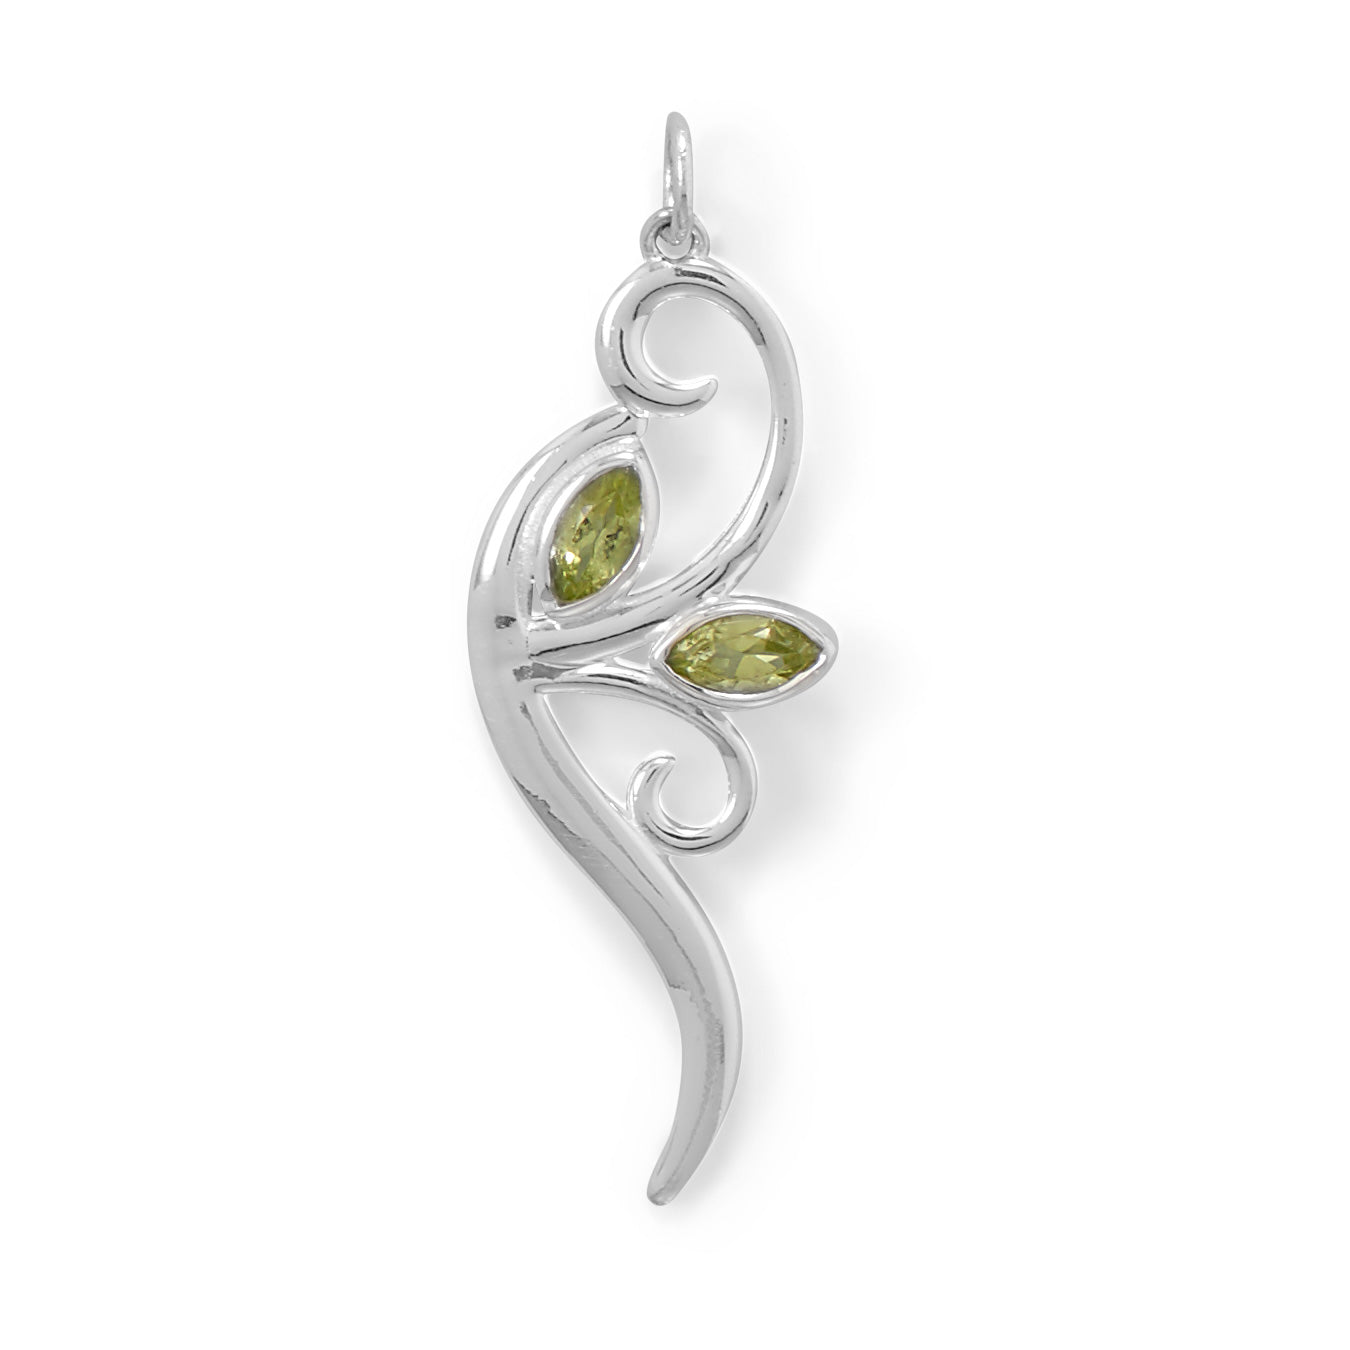 Unbe-LEAF-ily Beautiful! Peridot Leaf and Branch Pendant